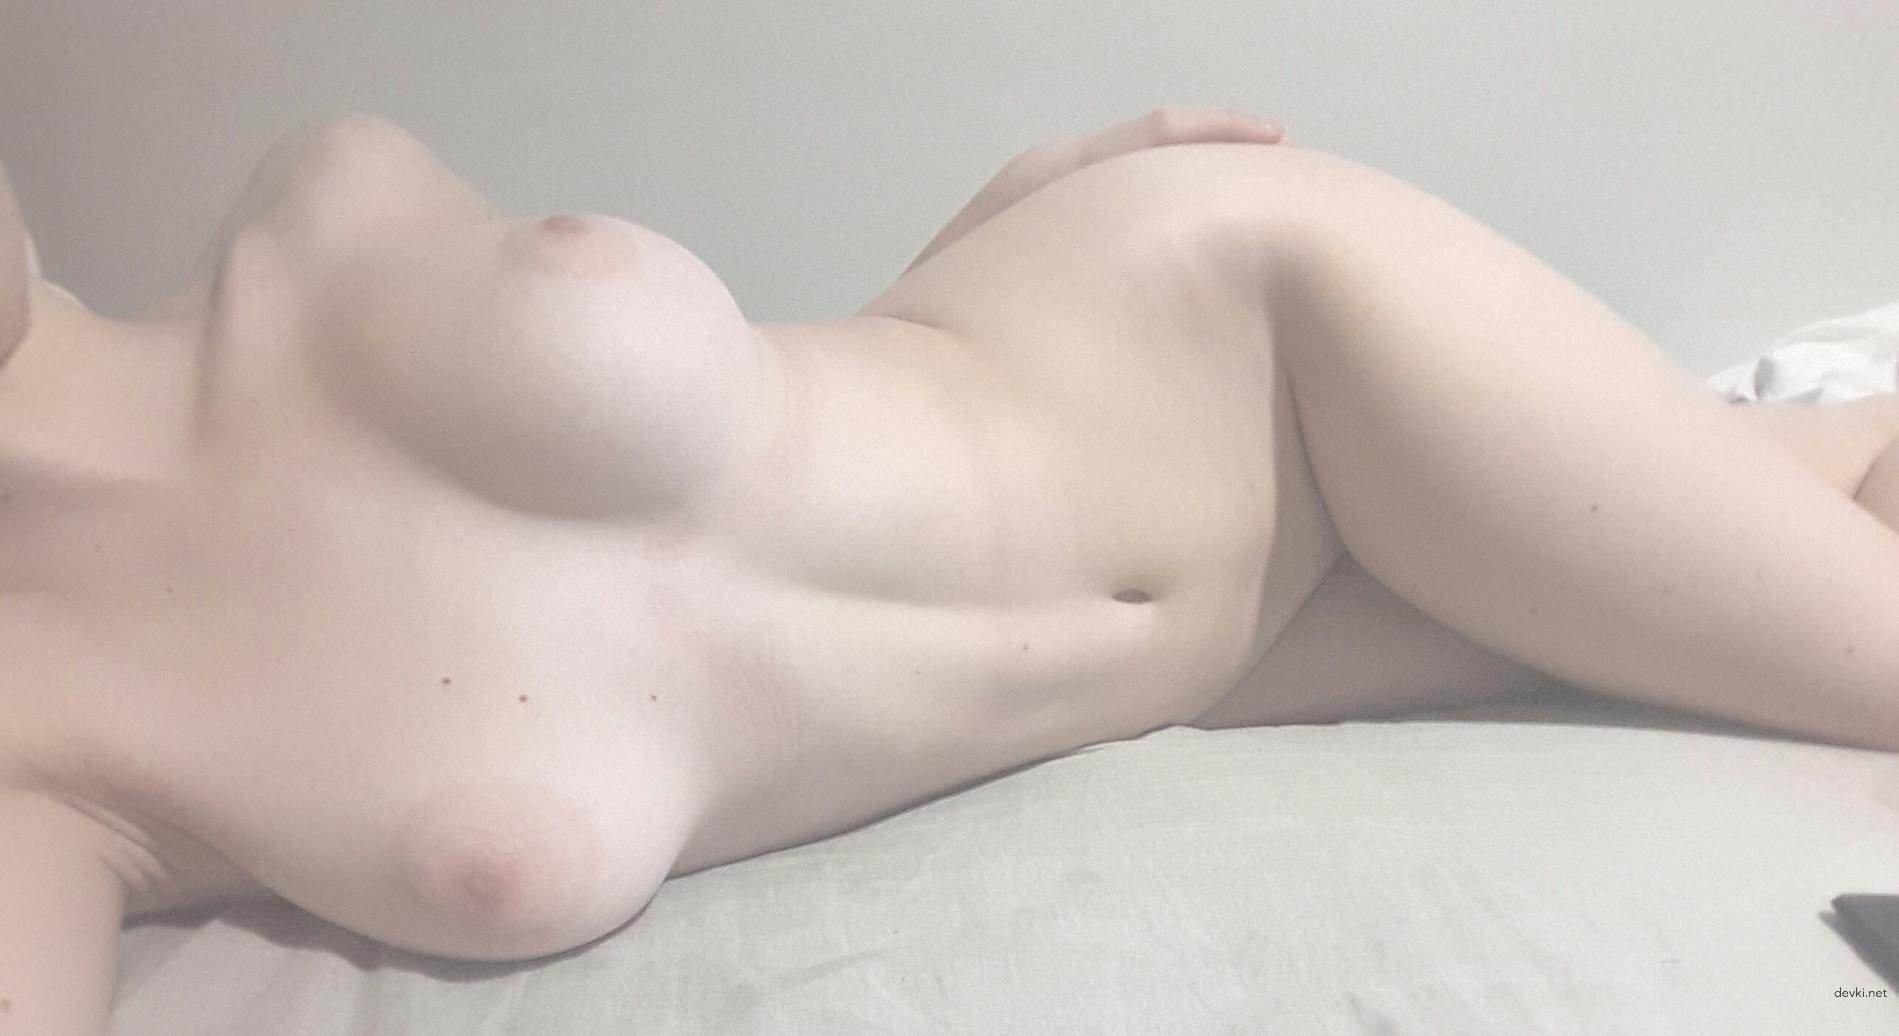 A good 30 year old girl, a dream for any boy/man from 13 to 90 pt.03 - NSFW, Sexuality, Girls, Erotic, Boobs, Stomach, Legs, Good body, No face